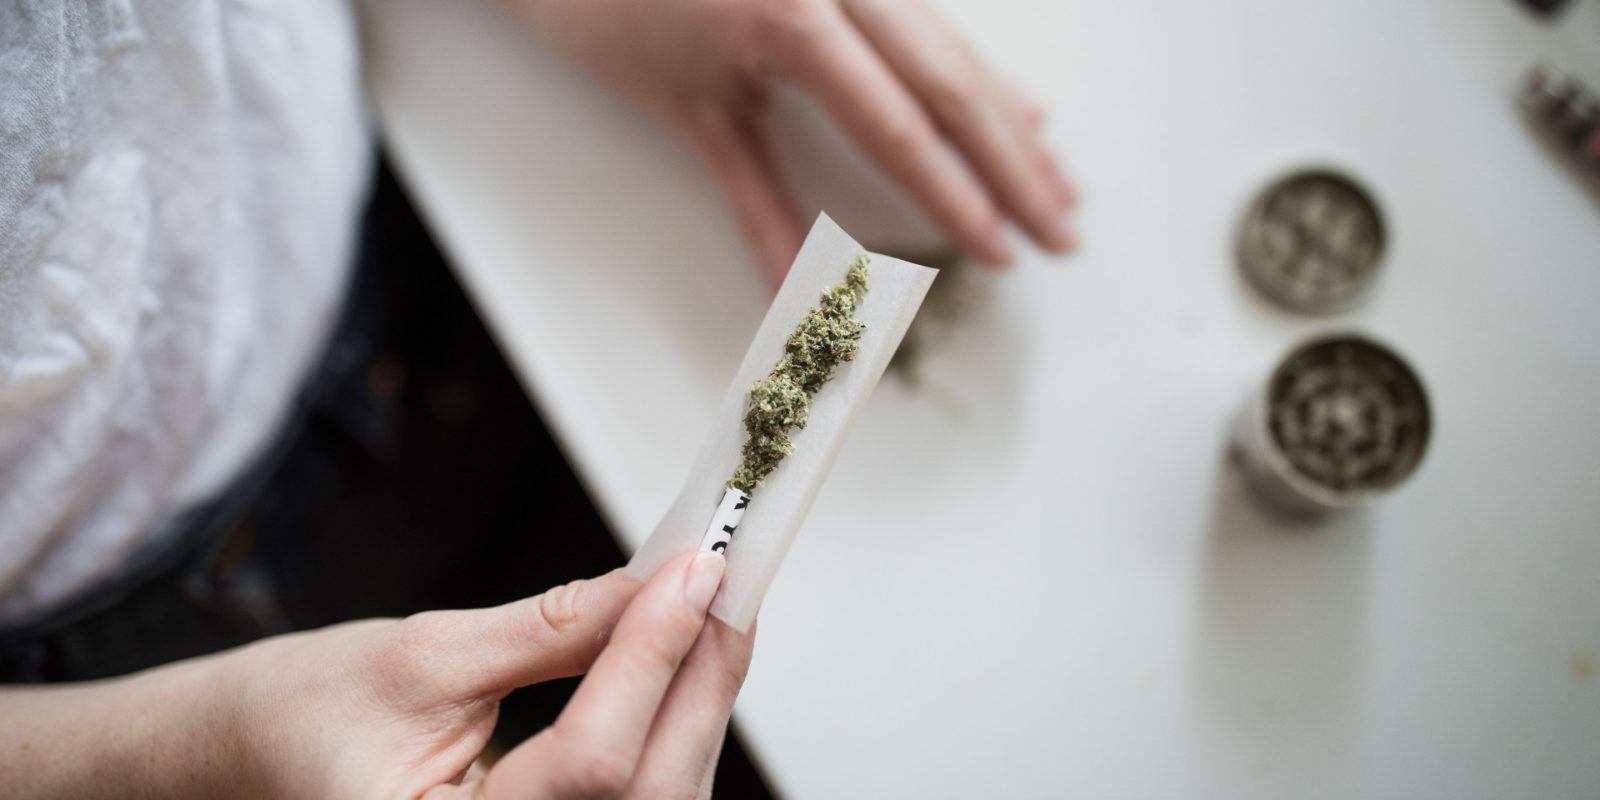 paper is filled with grinded cannabis before being rolled into pre-rolled blunts